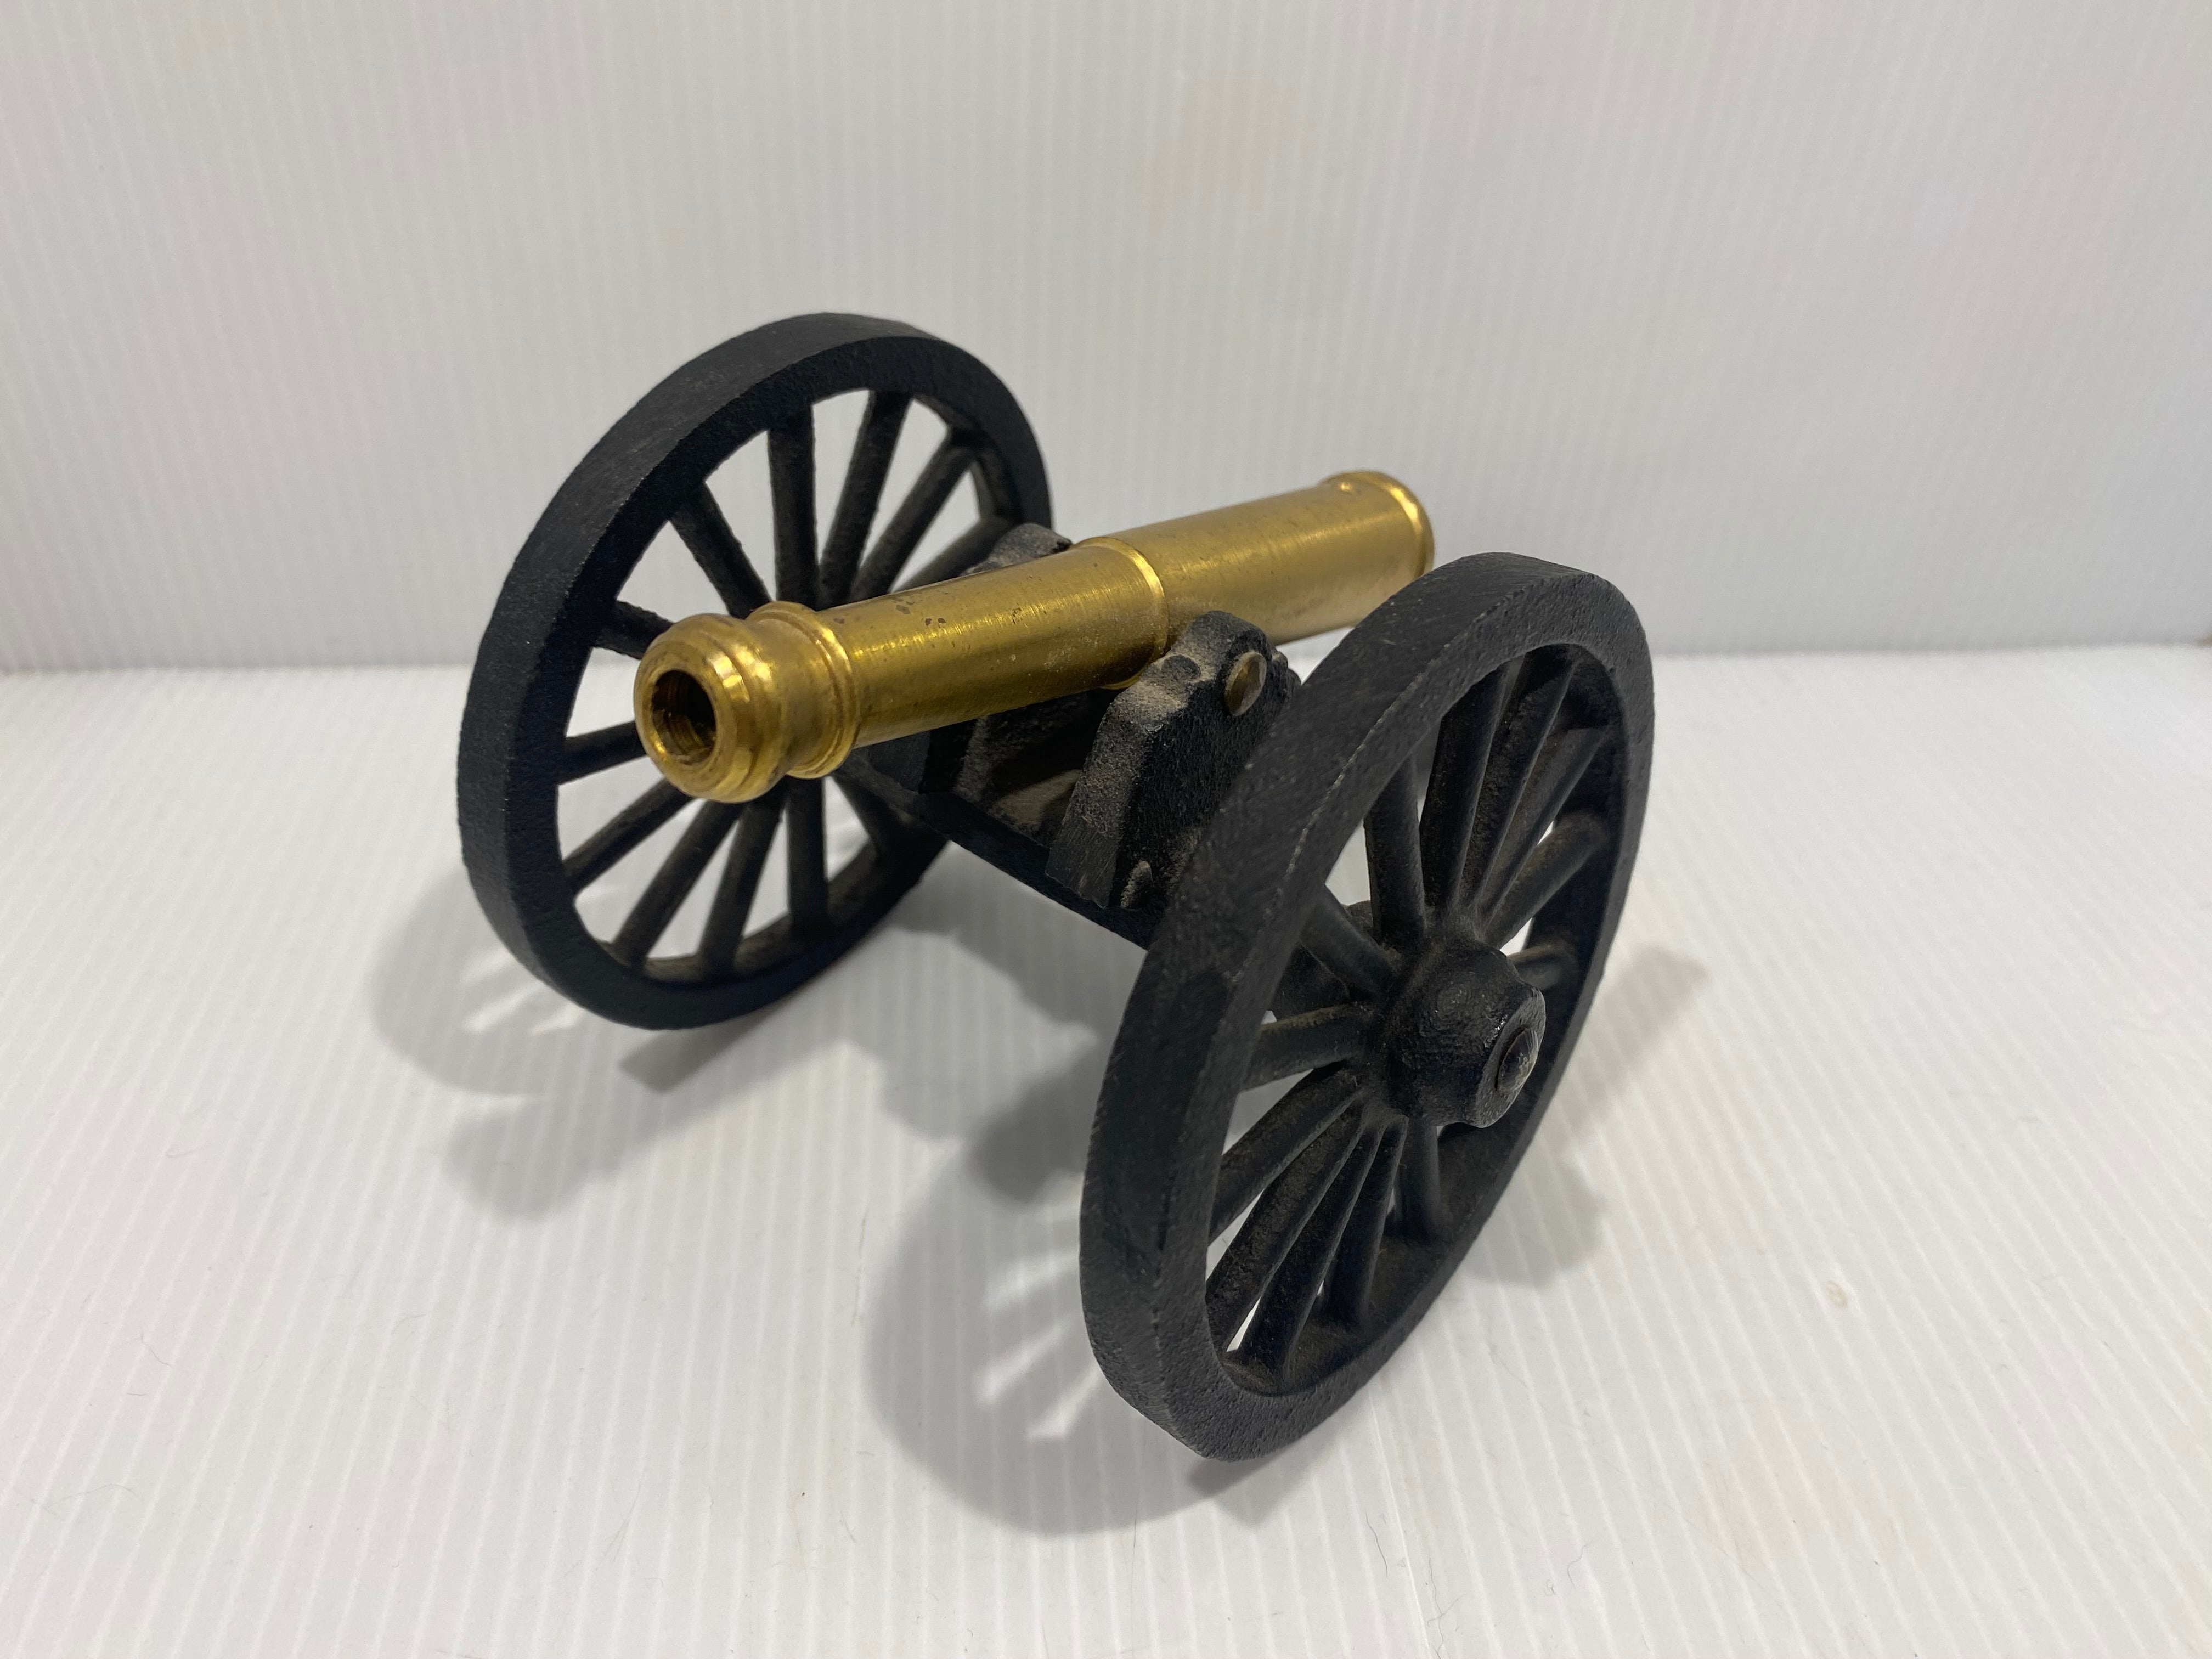 Vintage MFCO C 1/3 Brass Cannon with Cast Iron Wheels Toy.